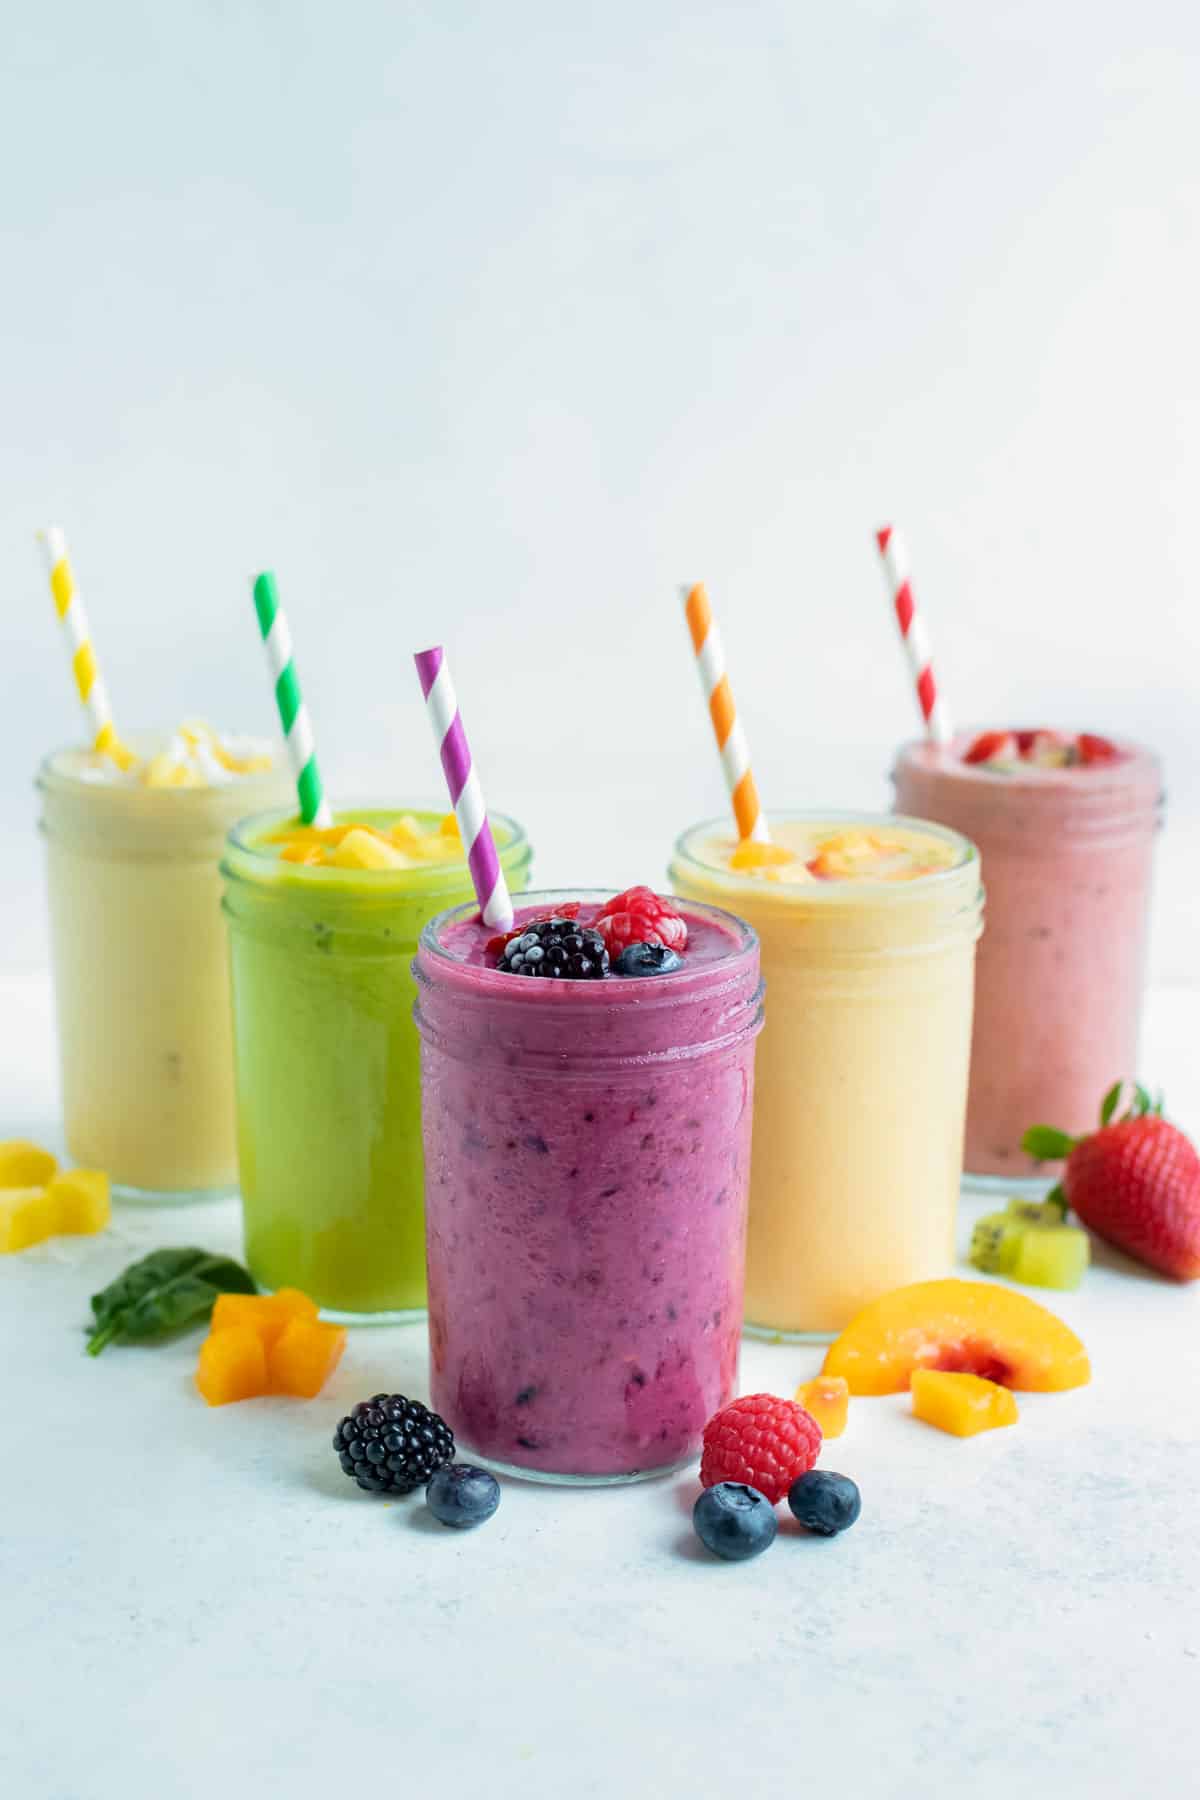 Many different flavors of frozen fruit smoothie recipes are set on the counter.